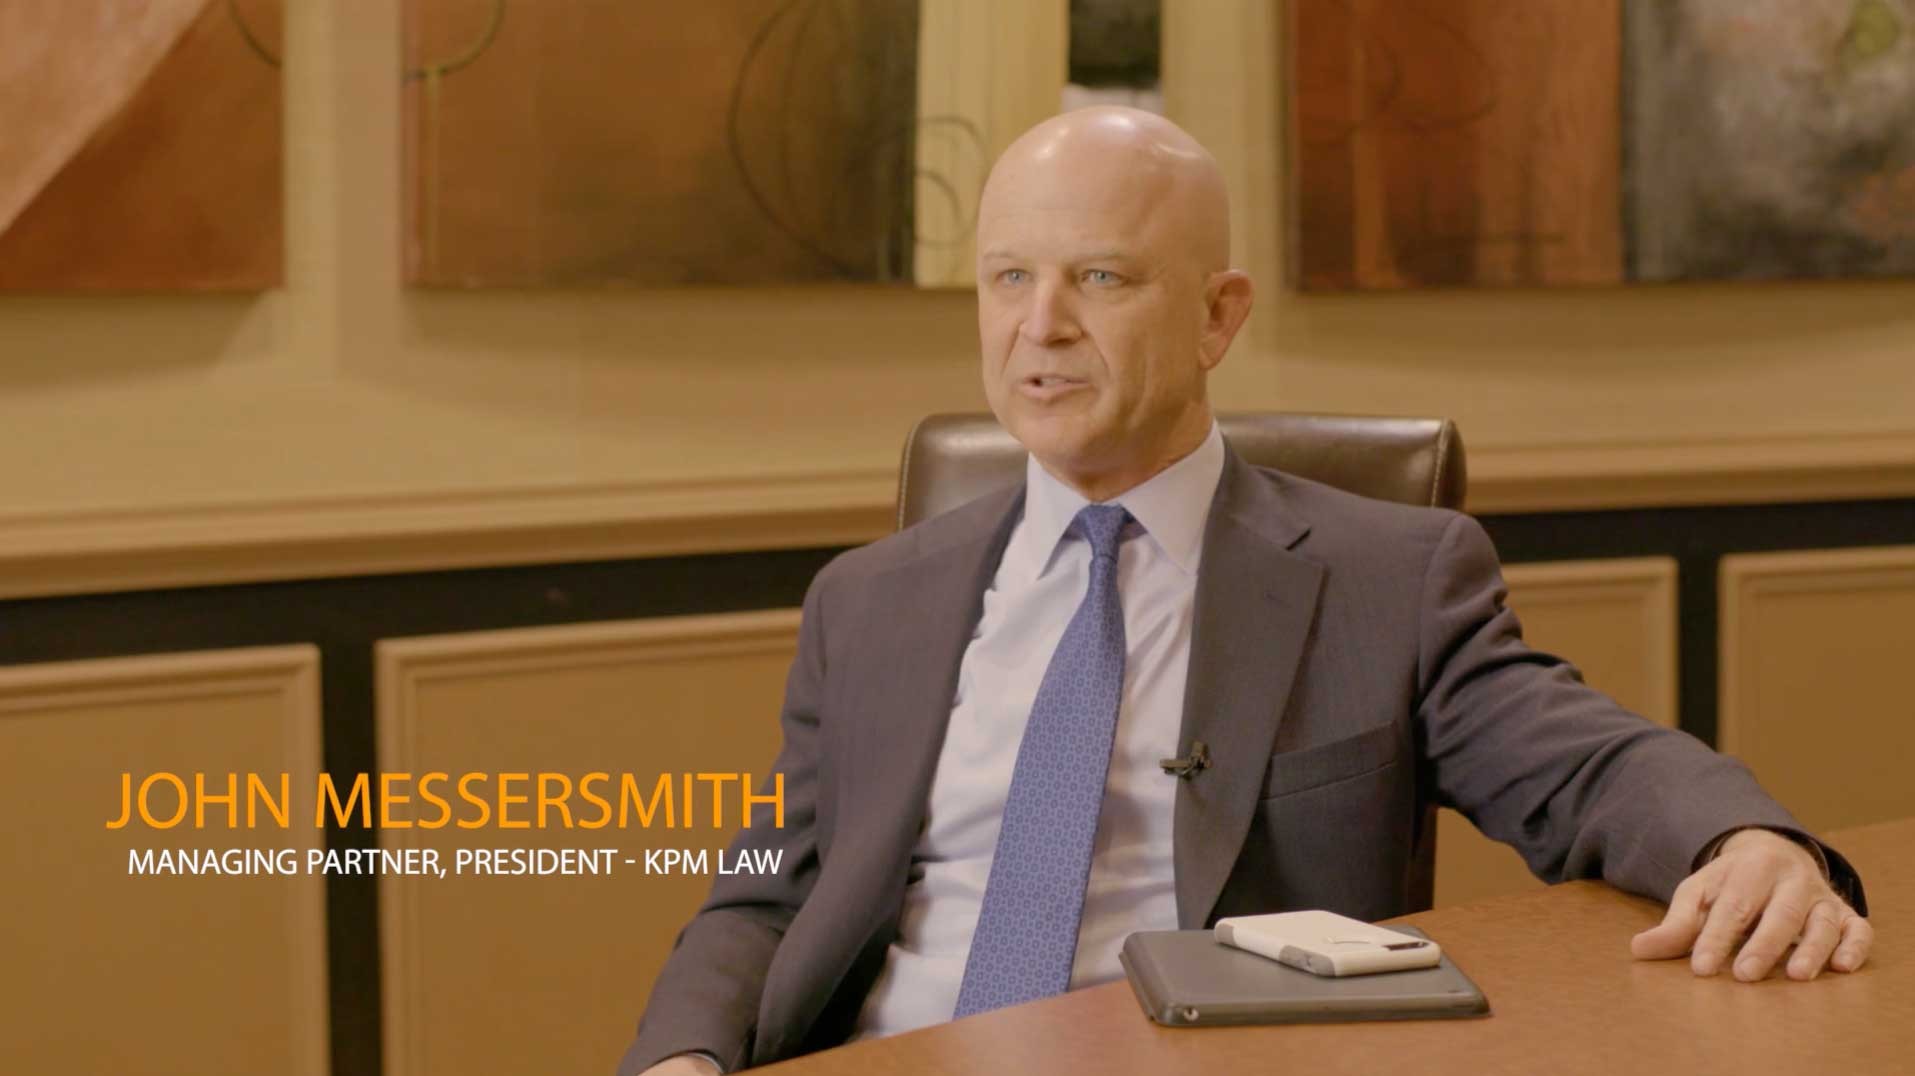 Video of John Messersmith talking about his law firm using ProLaw